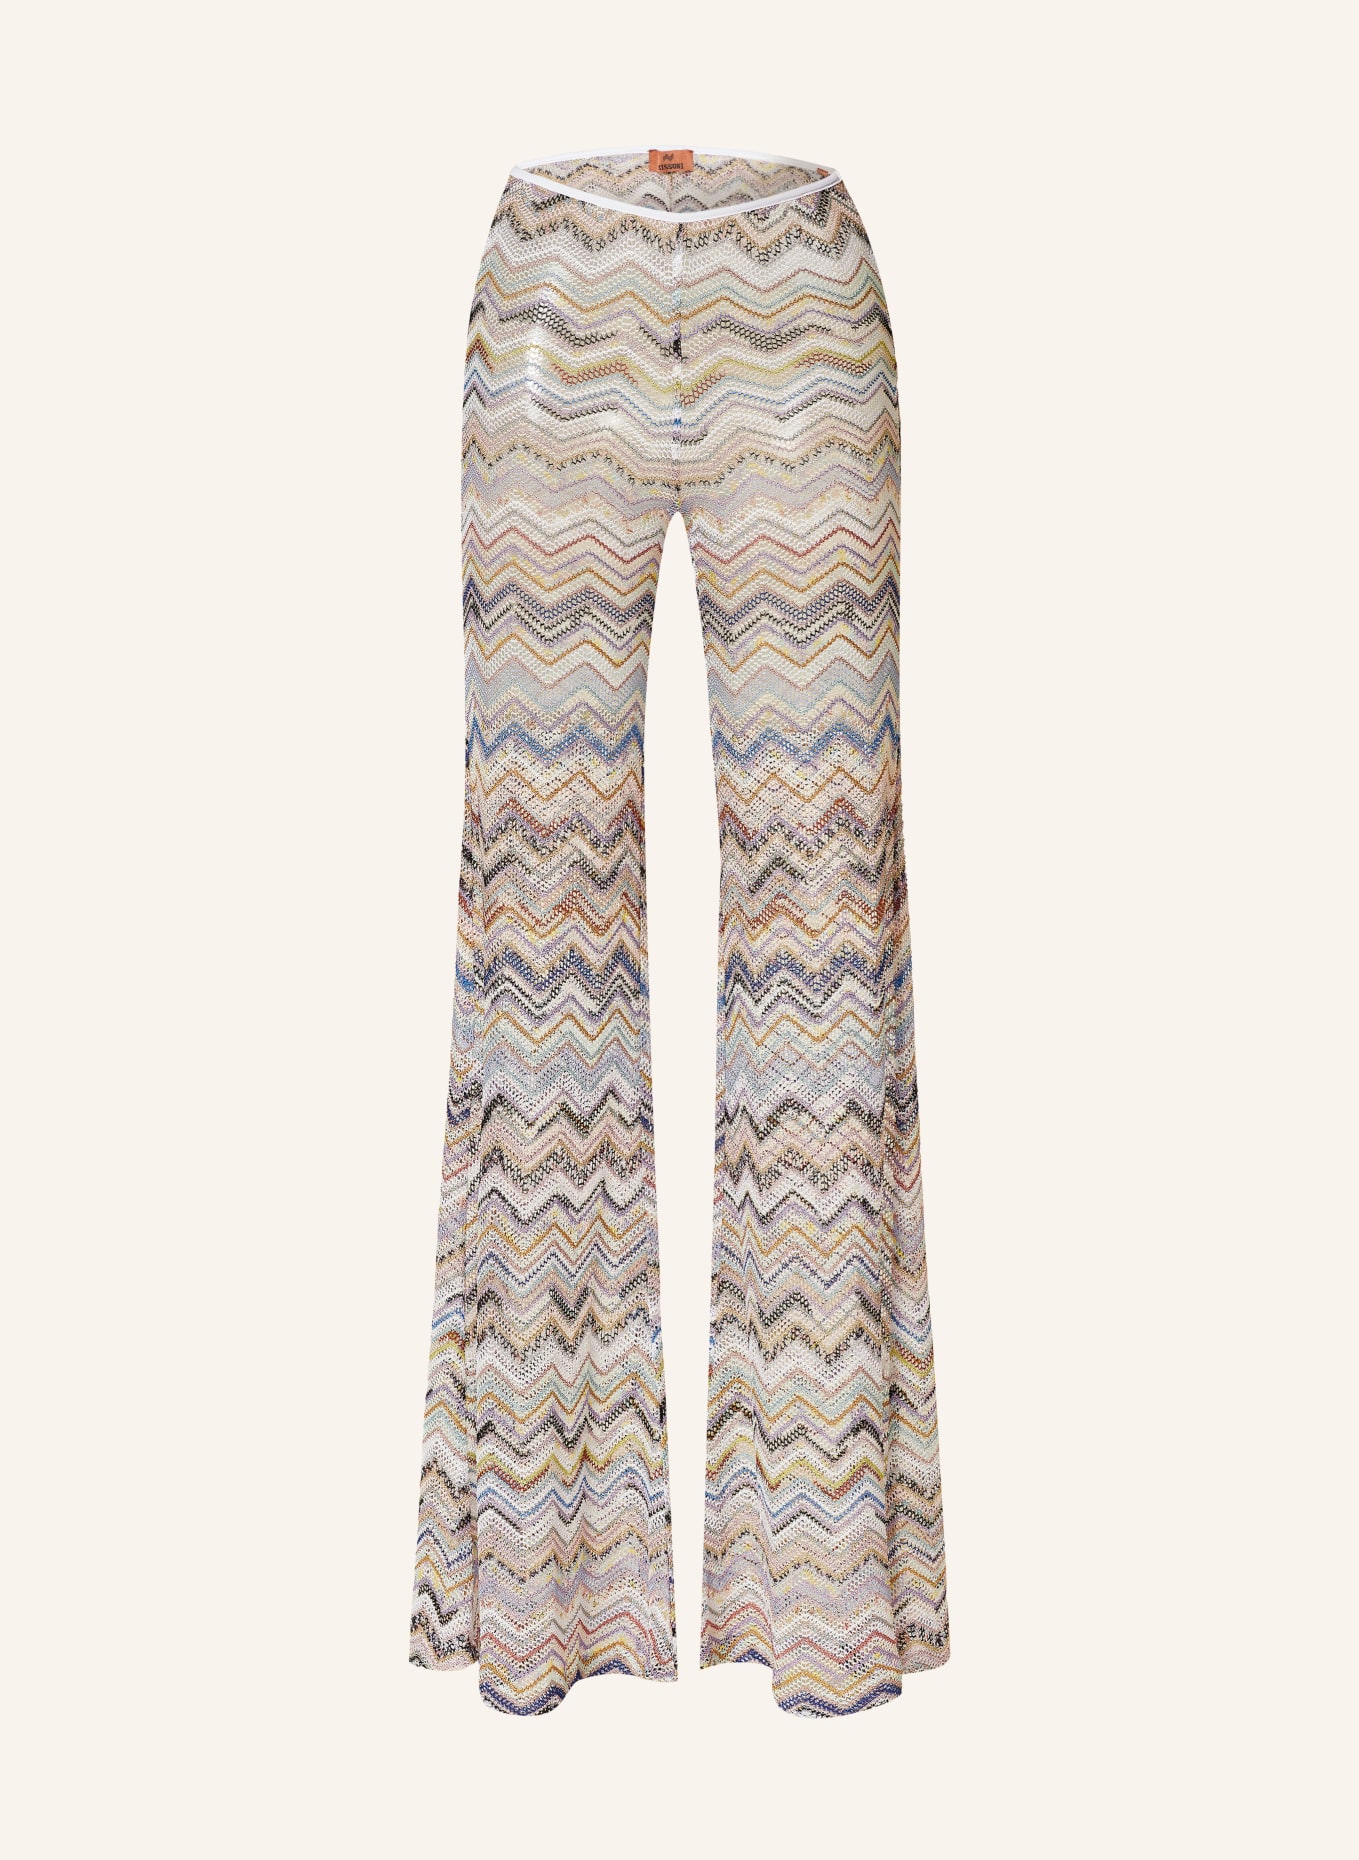 MISSONI Knit trousers with glitter thread, Color: LIGHT BLUE/ LIGHT PINK/ TURQUOISE (Image 1)